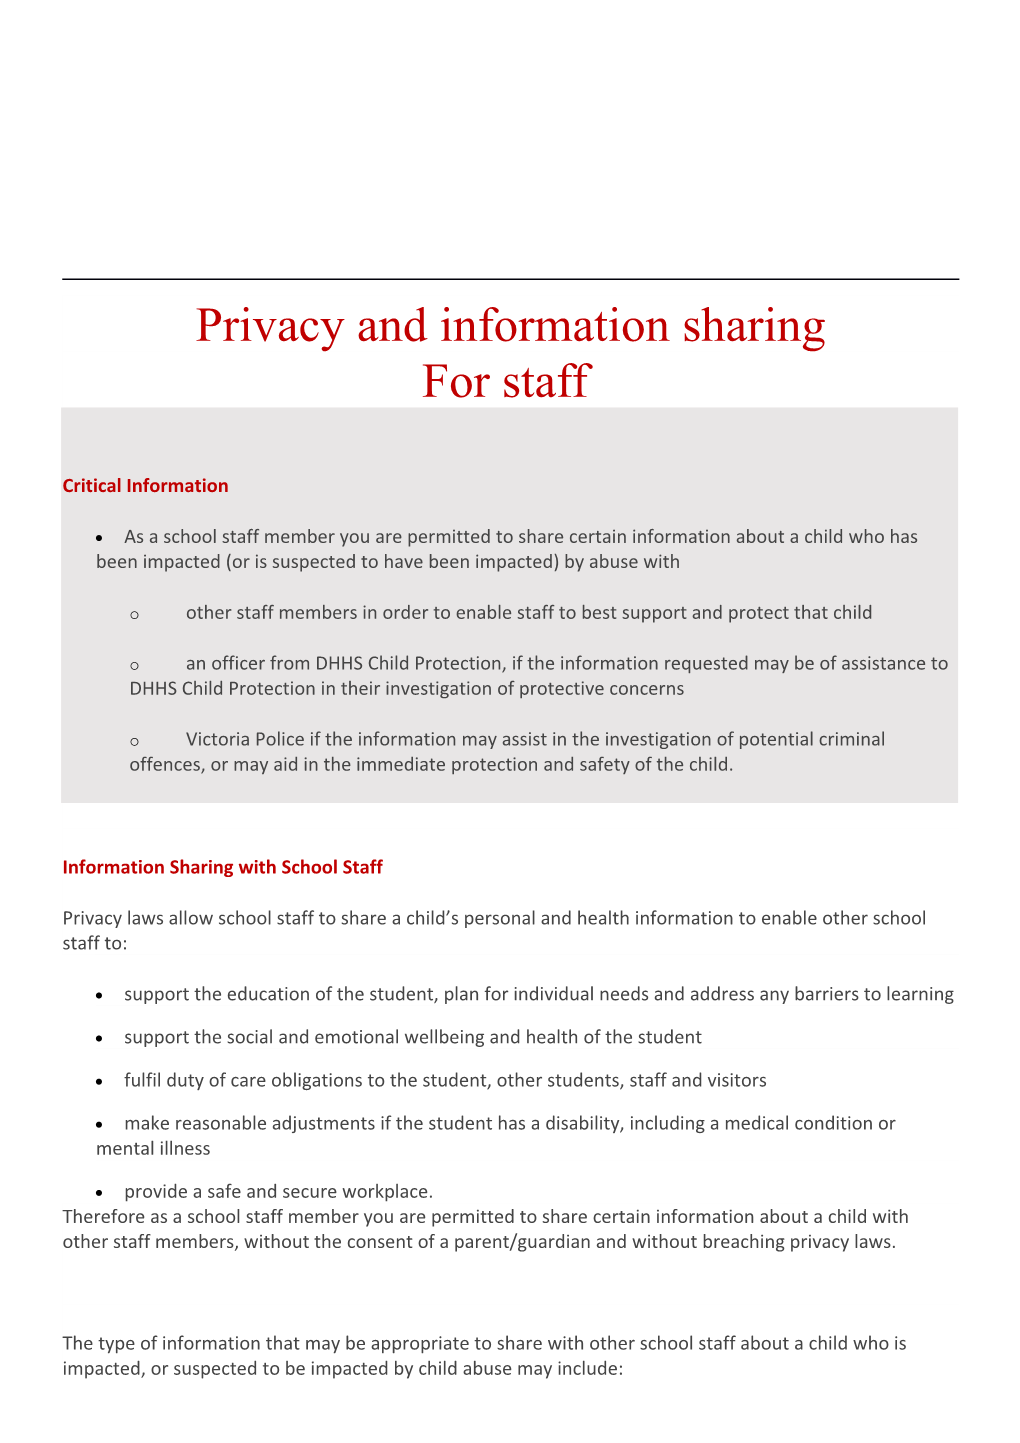 Privacy and Information Sharing